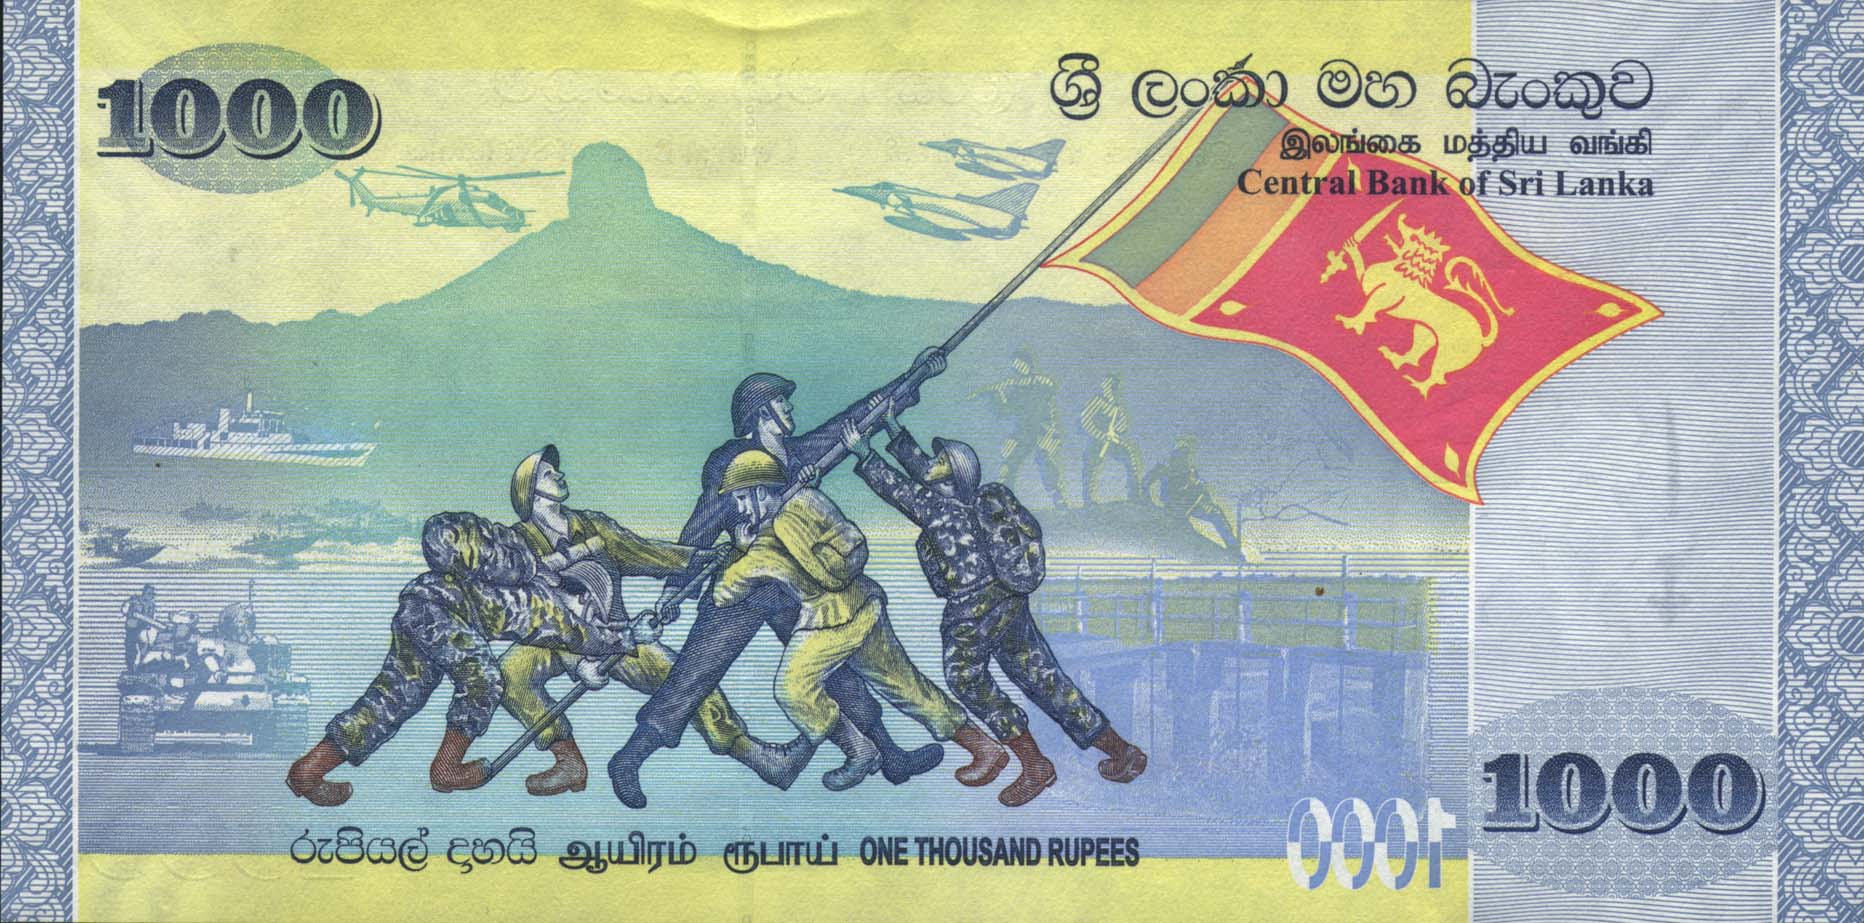 Sri Lanka’s Central Bank initially denied that the 1000 Rupee note circulated in 2009 was modeled after the Rosenthal photograph, but later confessed that the image was indeed the inspiration.